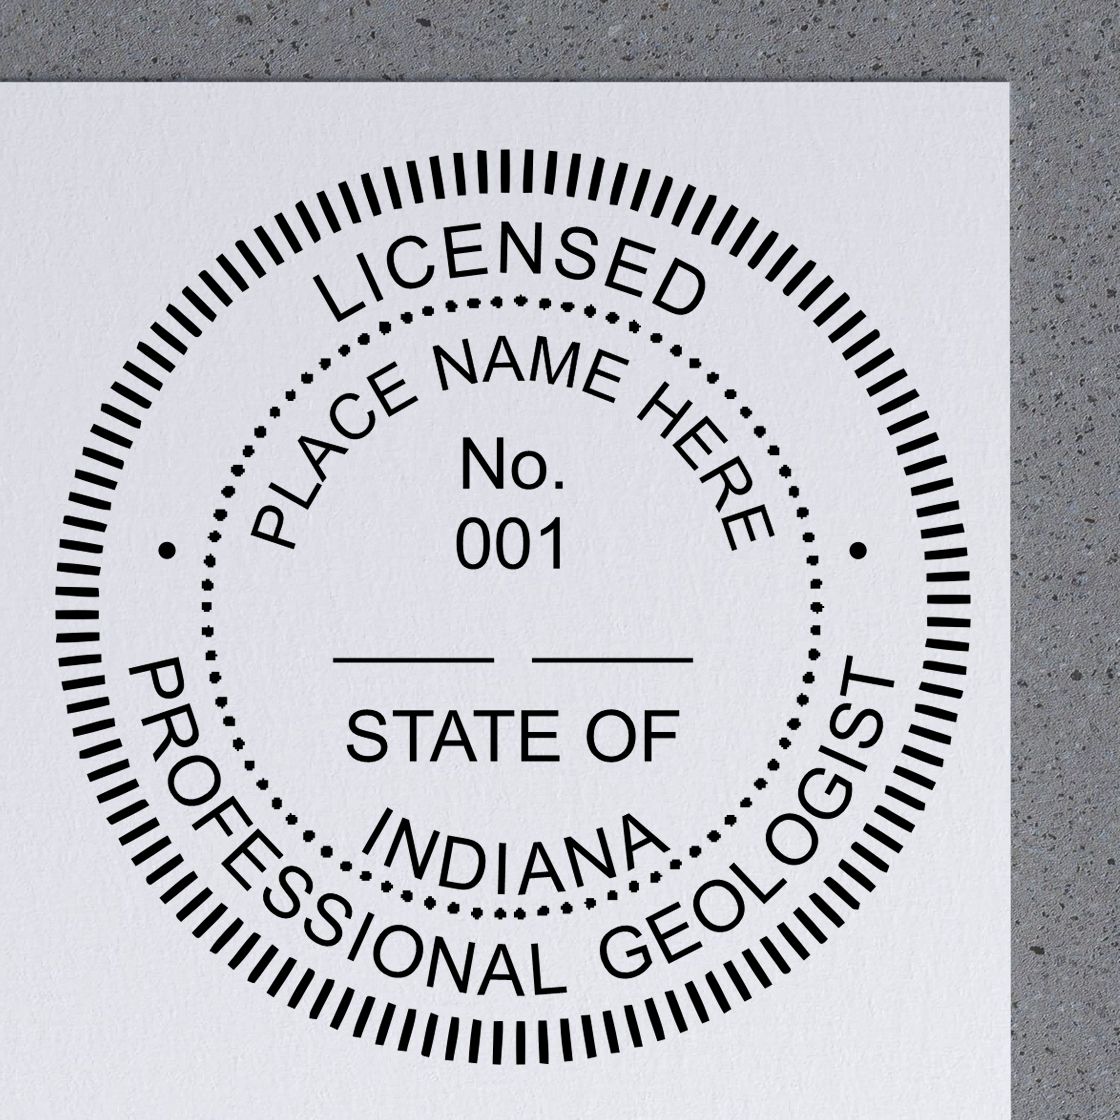 The main image for the Slim Pre-Inked Indiana Professional Geologist Seal Stamp depicting a sample of the imprint and imprint sample